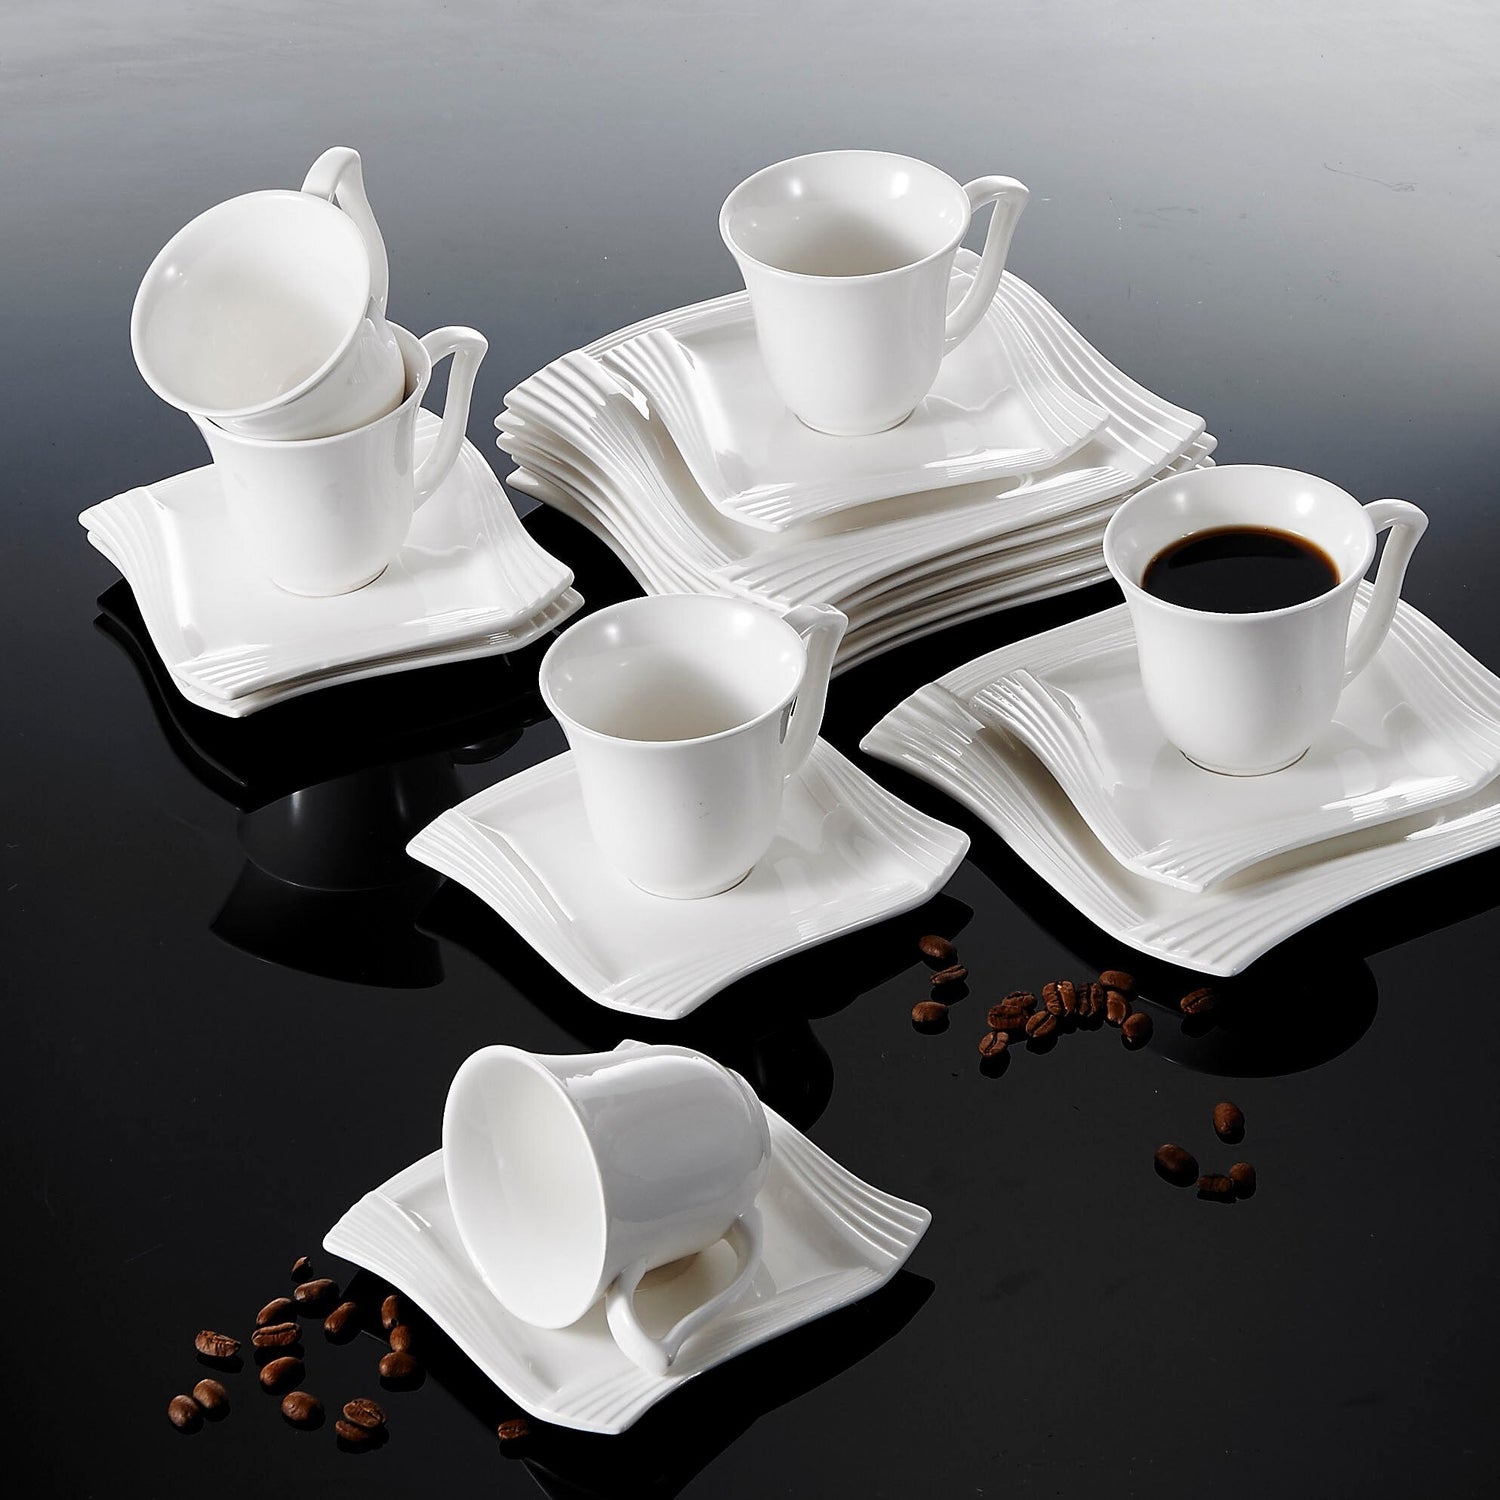 Amparo 18-Piece White Porcelain Coffee Tea Drinkware Sets including Cup,Saucers and Dessert Plates for 6 - Nordic Side - 18, Amparo, and, Coffee, CupSaucers, Dessert, Drinkware, for, Home, in